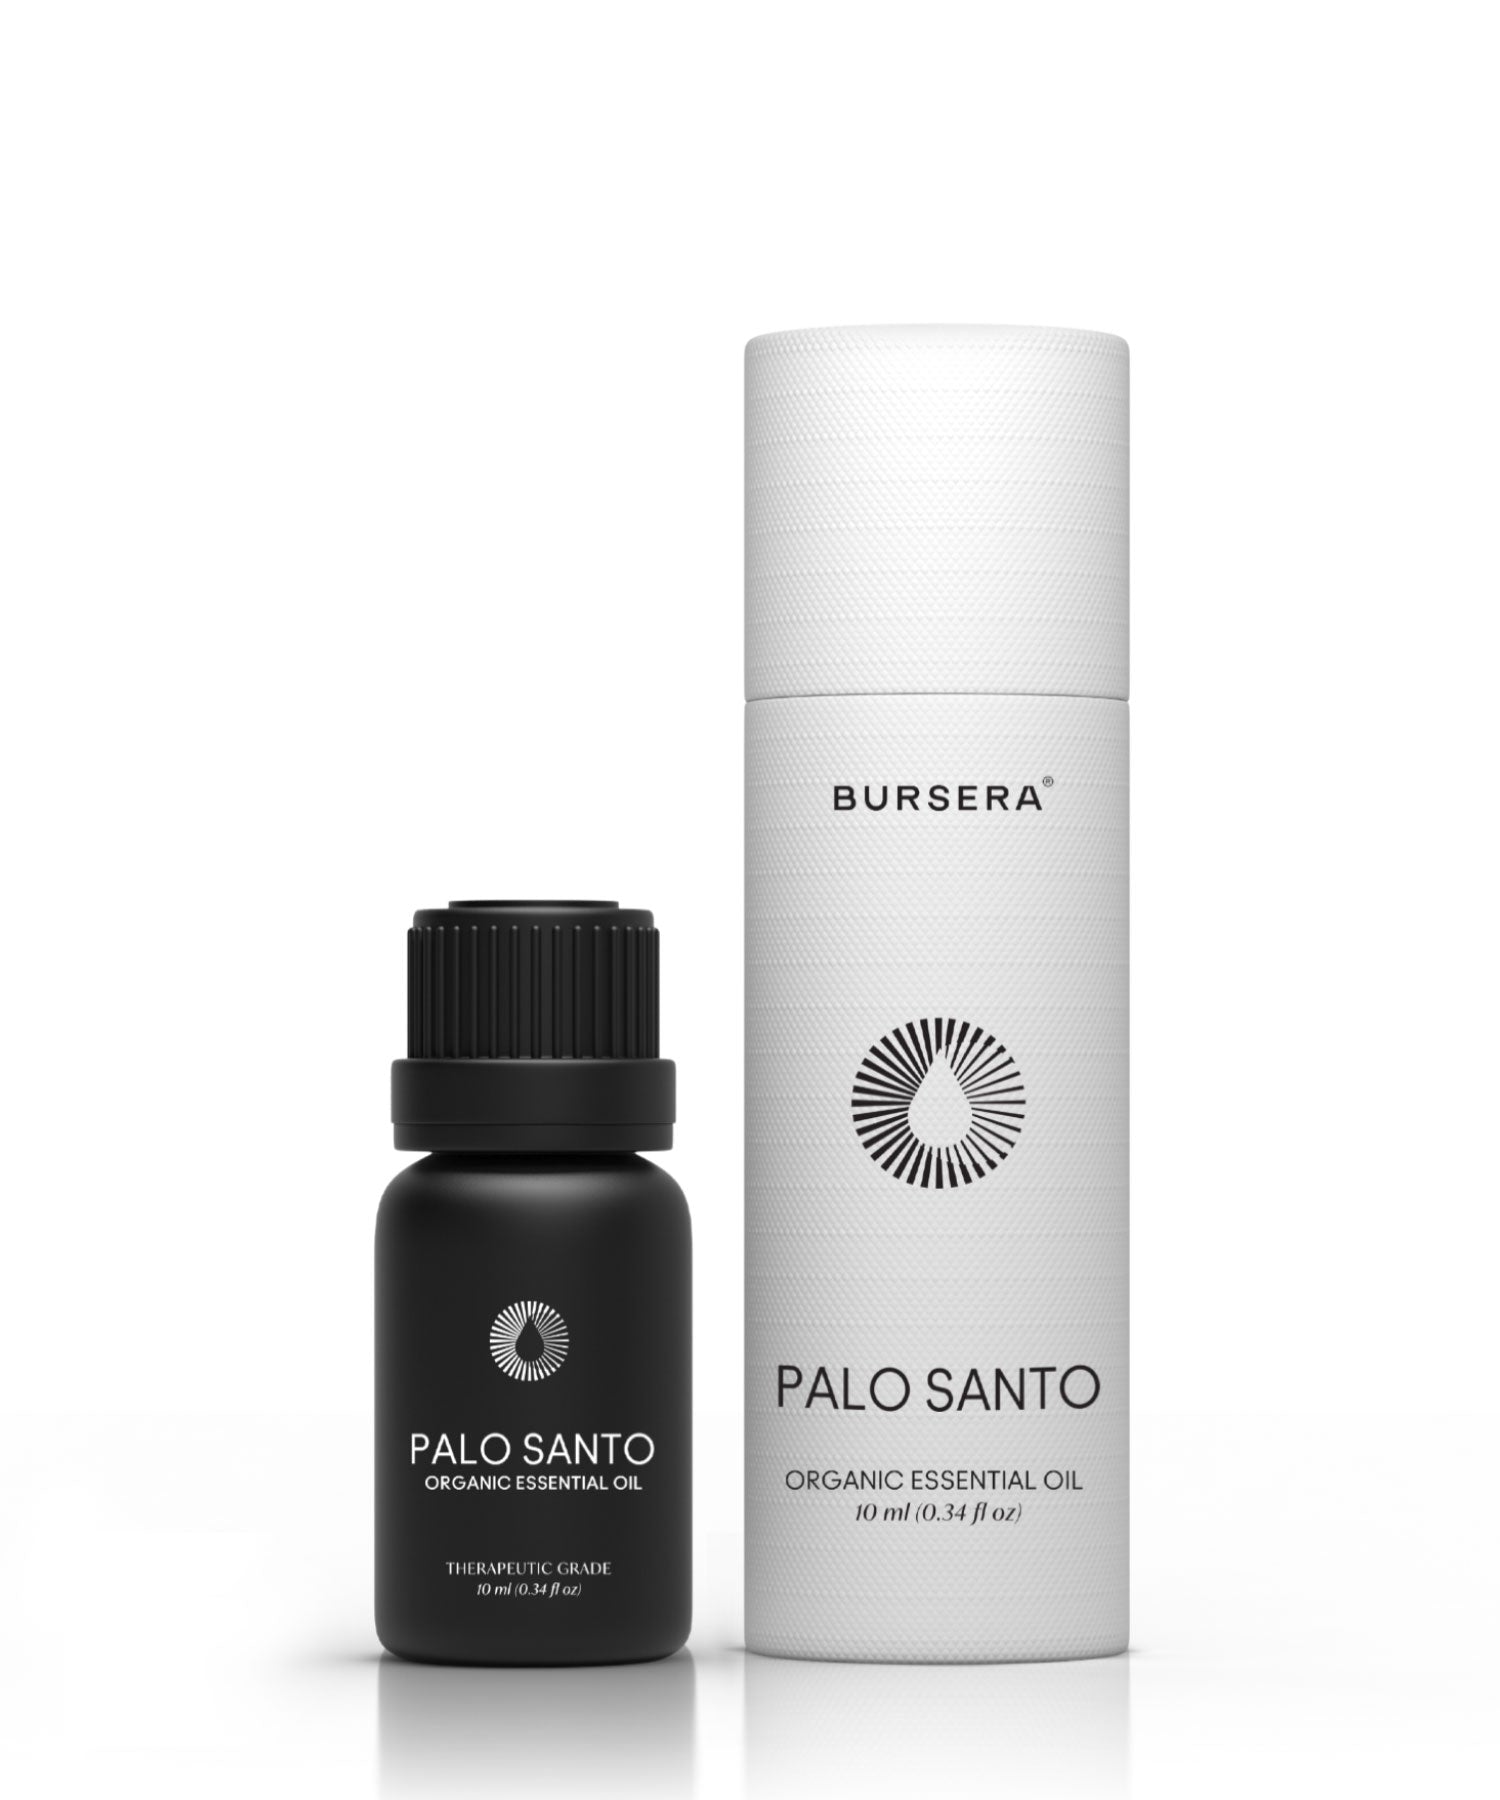 Palo Santo Essential Oil - Pure Organic Essential Oils for Diffuser -  Selecciòn Quality - Palo Santo Oil ideal for Aromatherapy and Stress Relief  - 2,5 ml